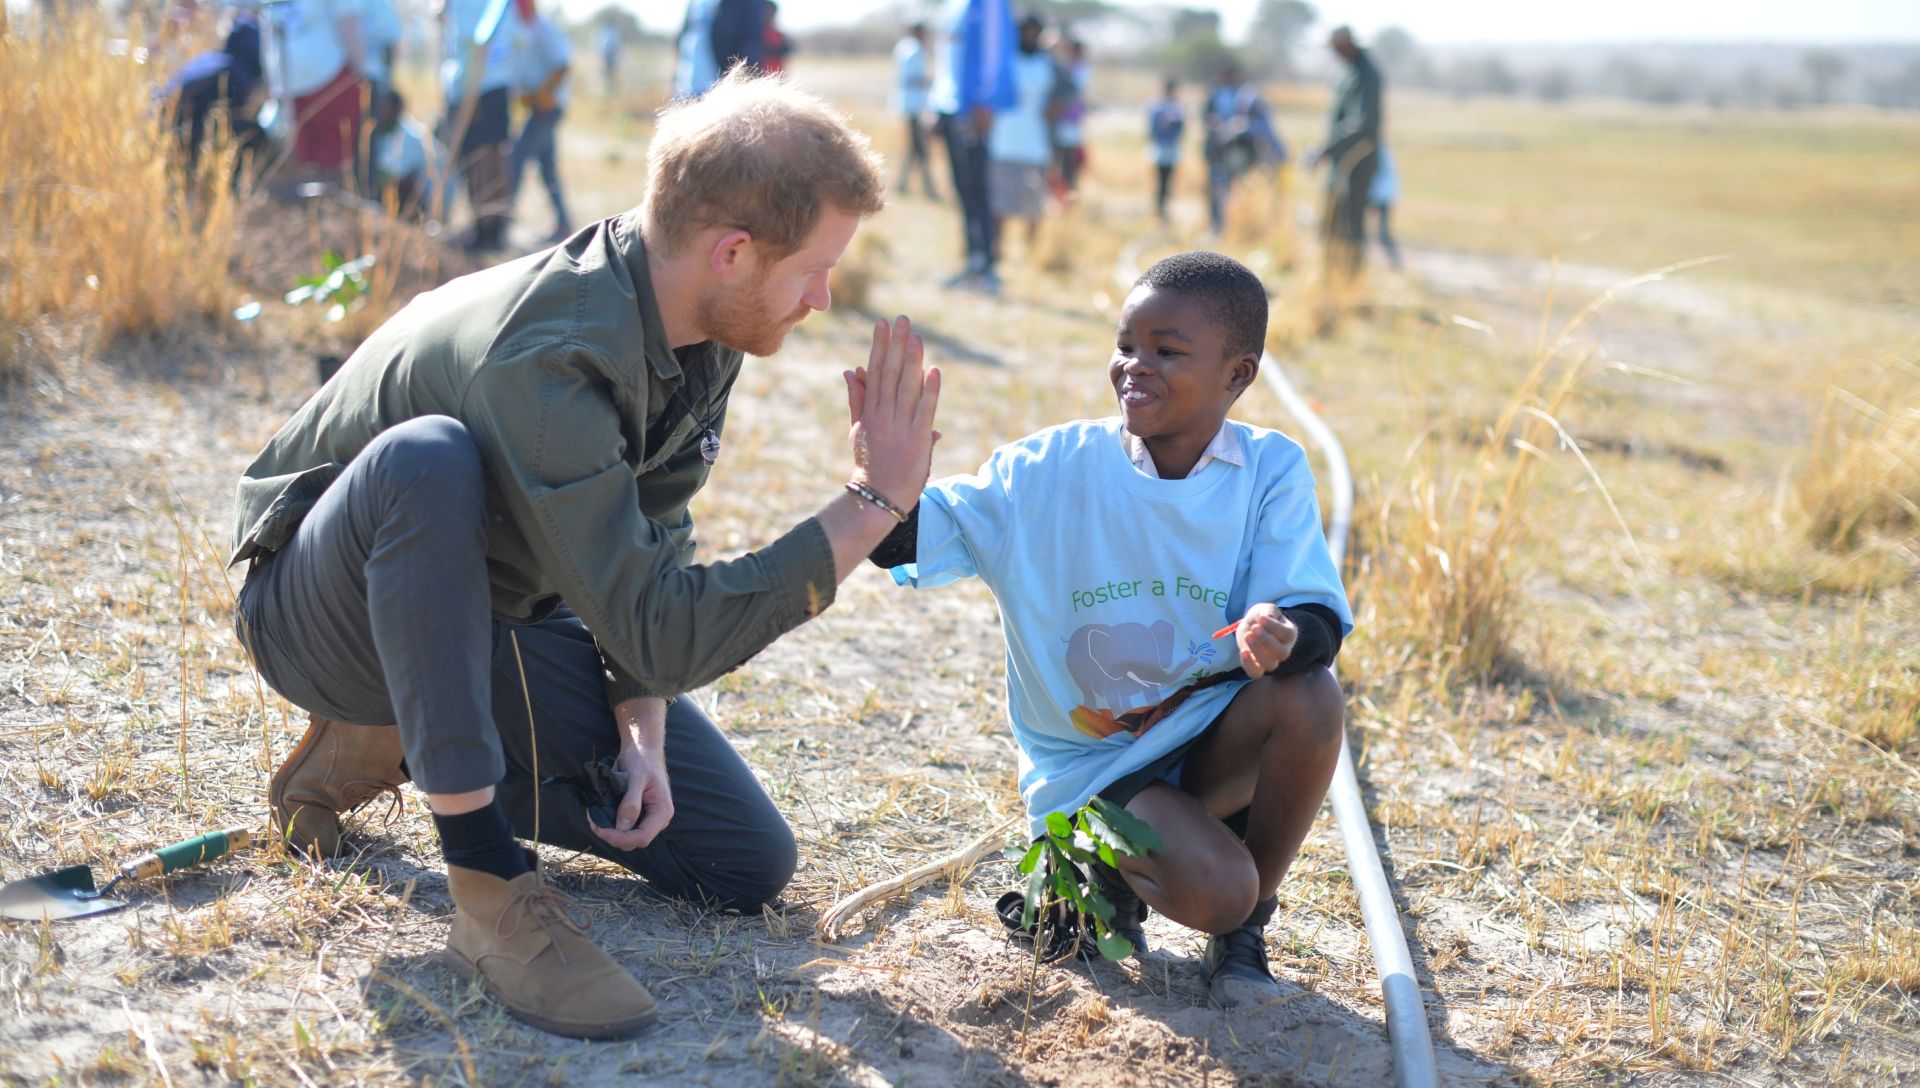 epa07870158 The Duke of Sussex helps local schoolchildren plant trees at the Chobe Tree Reserve, Kasane, Botswana 26 September 2019. Chobe National Park in is home to Africa’s largest elephant population (more than 17,000) and comprises more than 10,000km2 of rich ecosystems, diverse landscapes and an abundance of wildlife and birdlife who depend on the Chobe River as a critical source of water. The Duke and Duchess of Sussex are on an official visit to South Africa.  EPA/DOMINIC LIPINSKI / PA PHOTOS / POOL